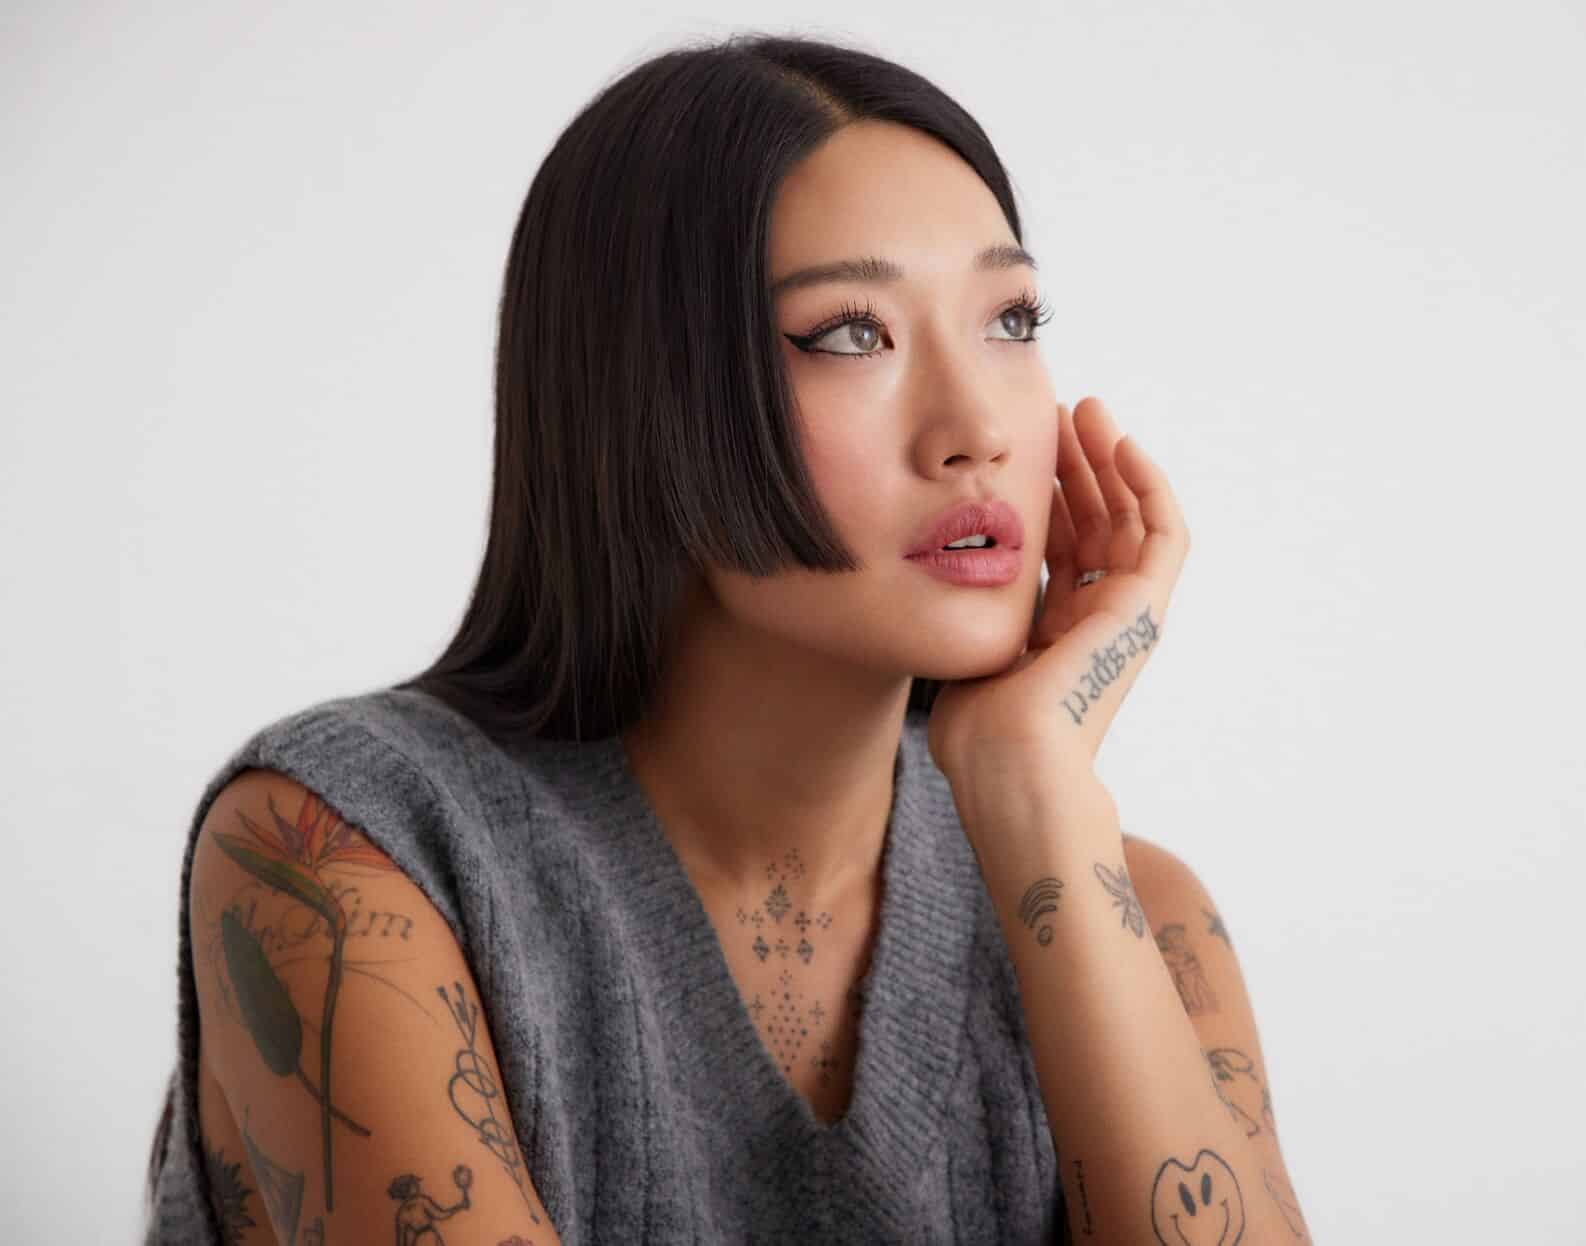 Peggy Gou at Coachella: What to expect?